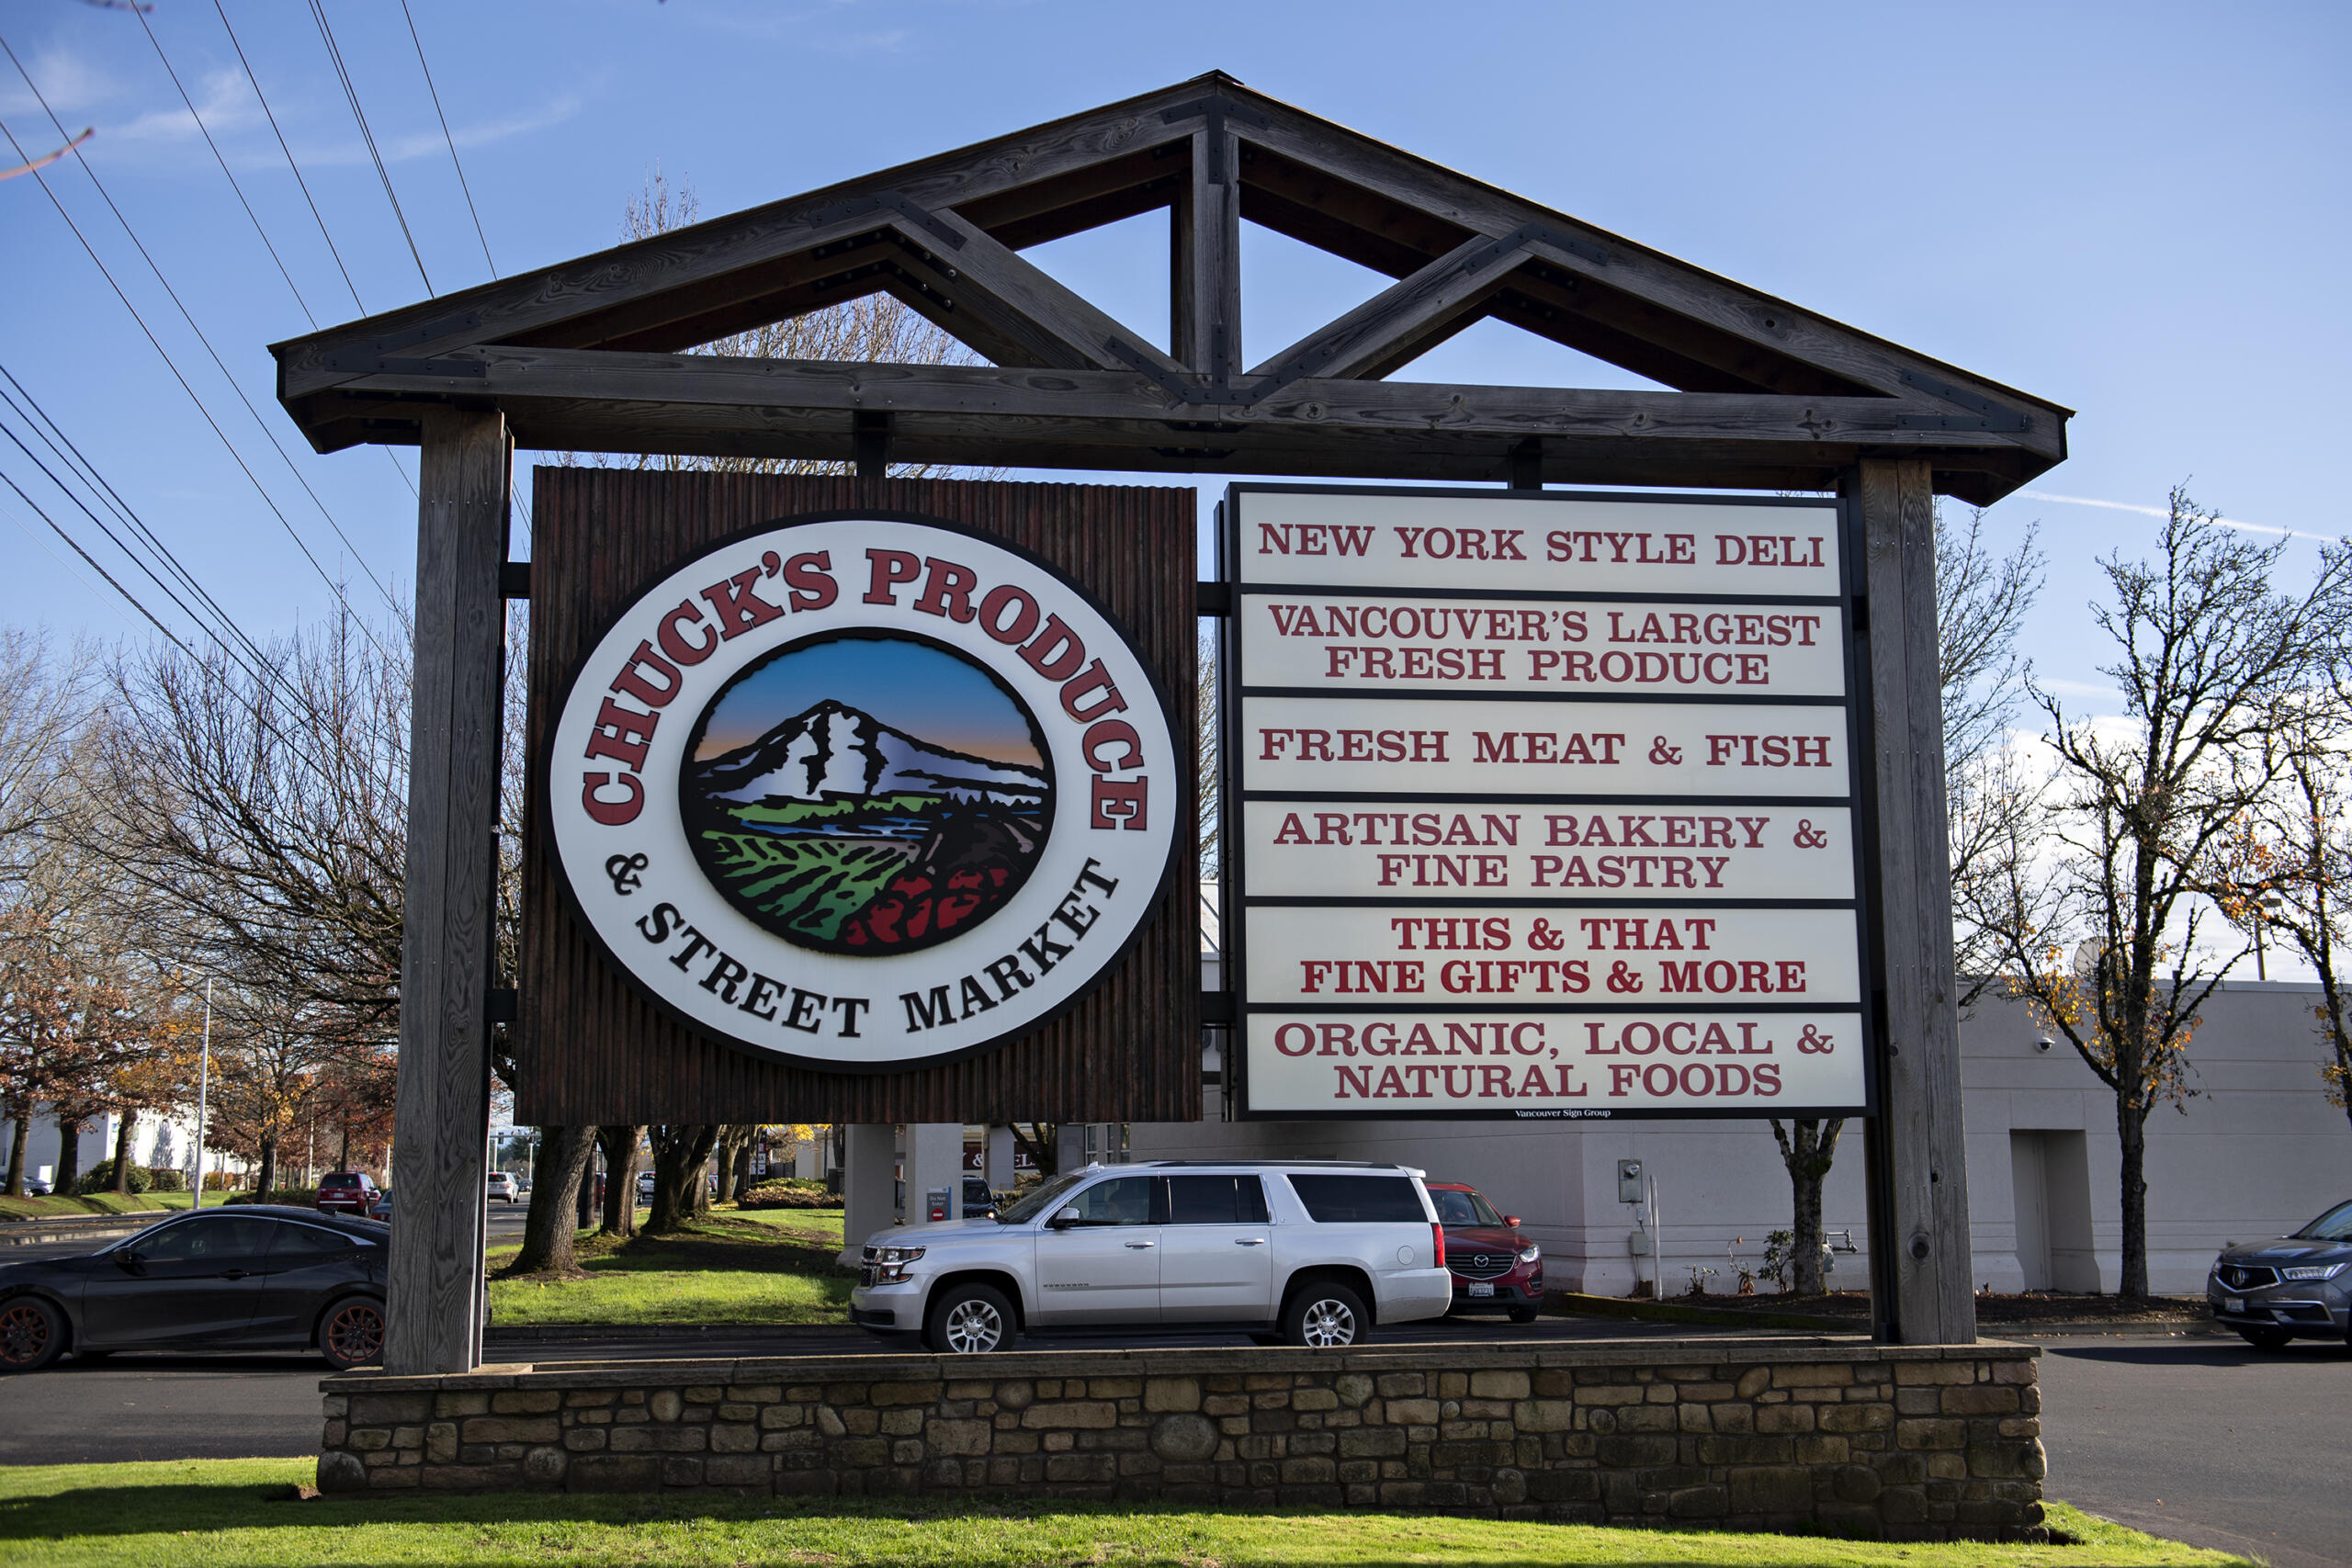 Chuck's Produce & Street Market had been up for sale since the end of 2021.